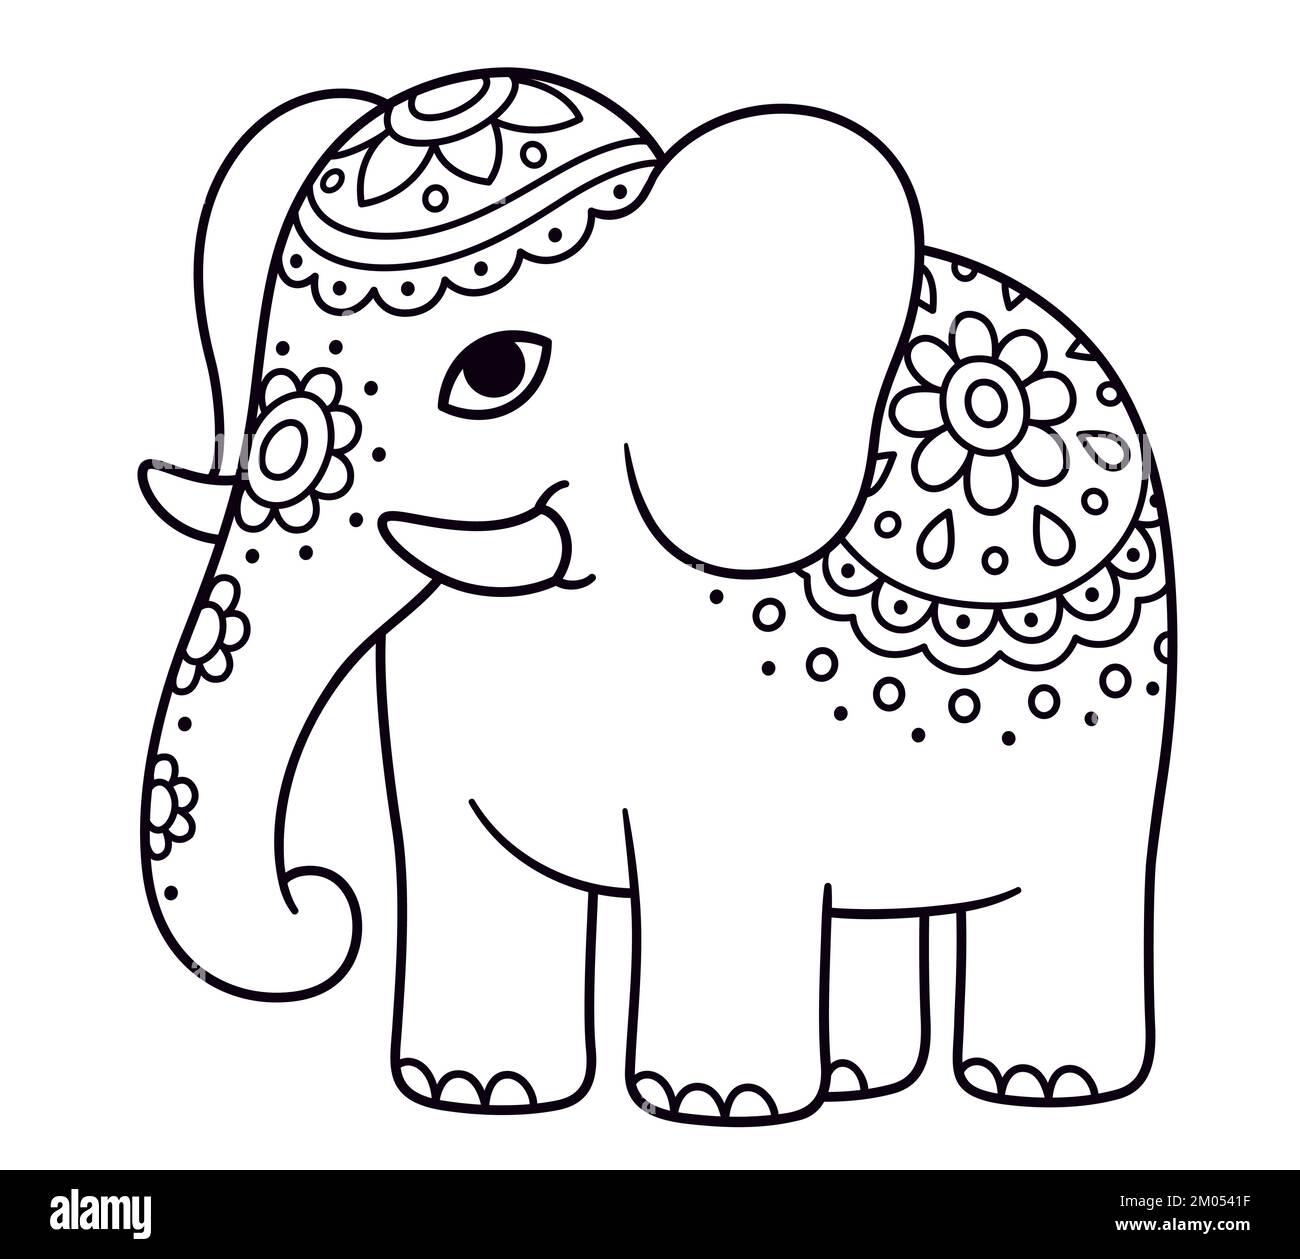 Cute cartoon decorated elephant doodle. Indian elephant with painted flowers. Black and white line art for coloring. Vector clip art illustration. Stock Vector